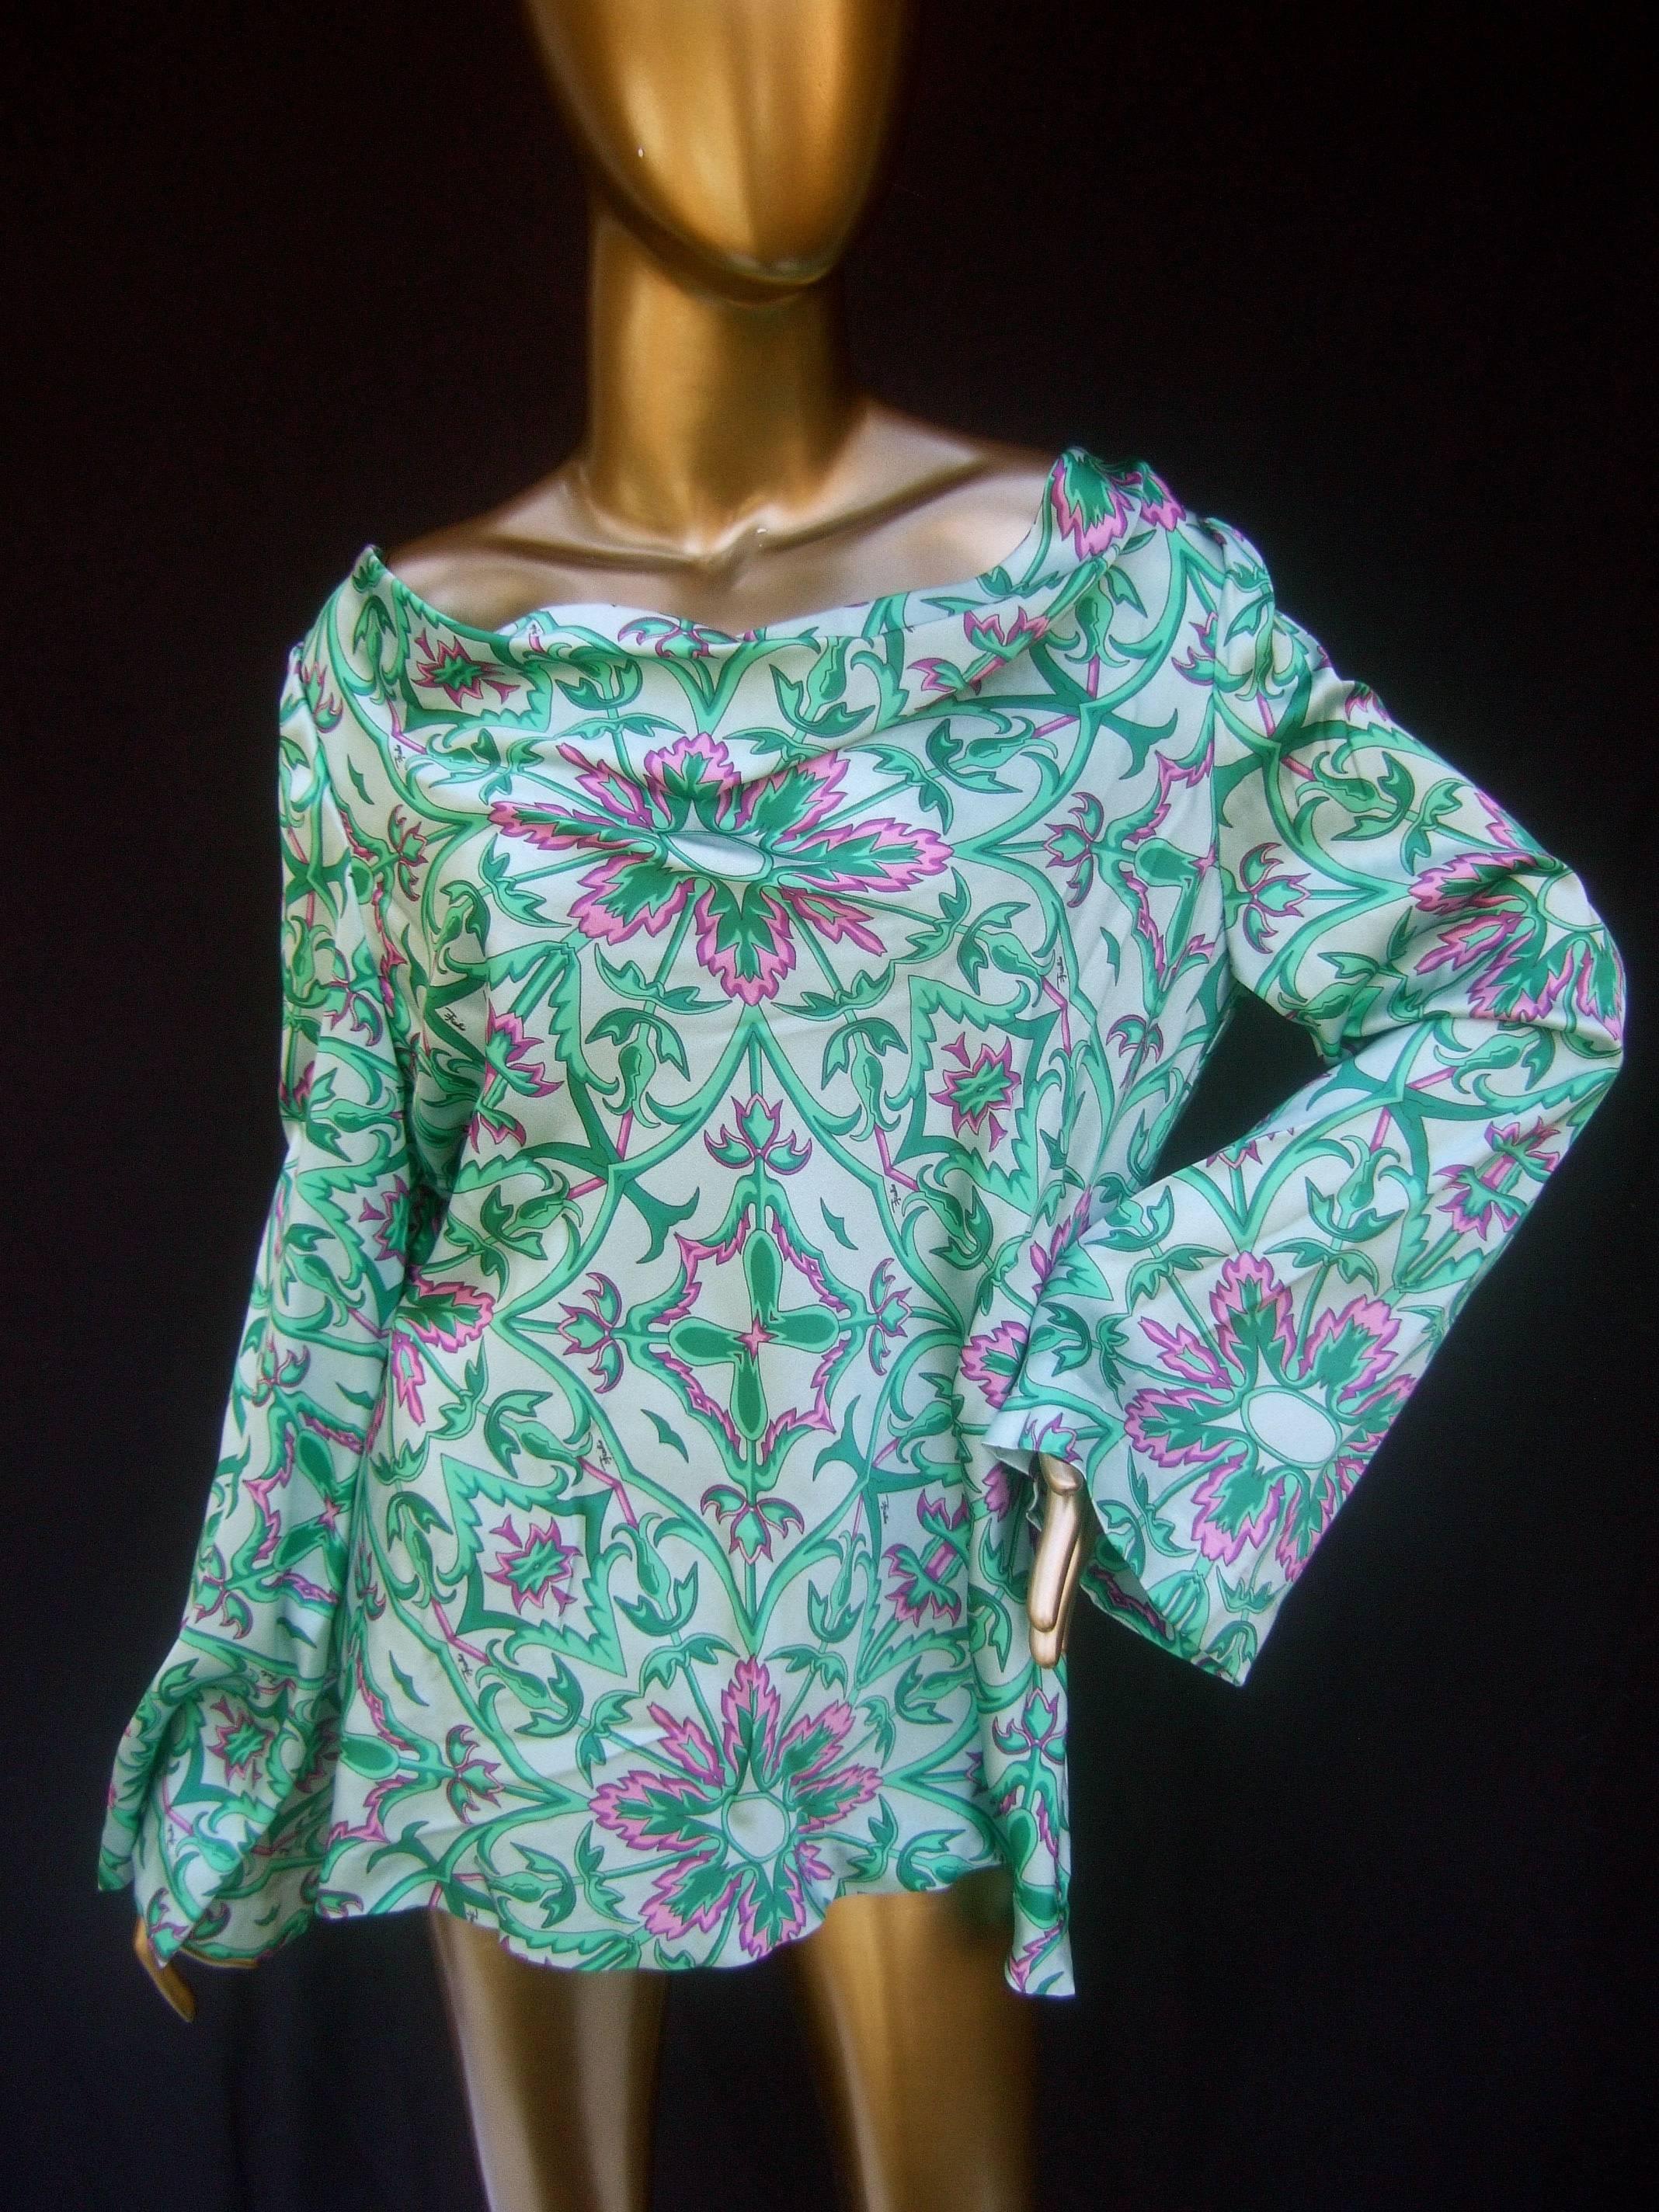 Emilio Pucci floral print tunic style blouse c 1970s
The unique tunic graphic print blouse is illustrated with a field
of pink flowers combined with sinuous leafy foliage 
set against a pale mint green silky satin background 

Emilio's script name